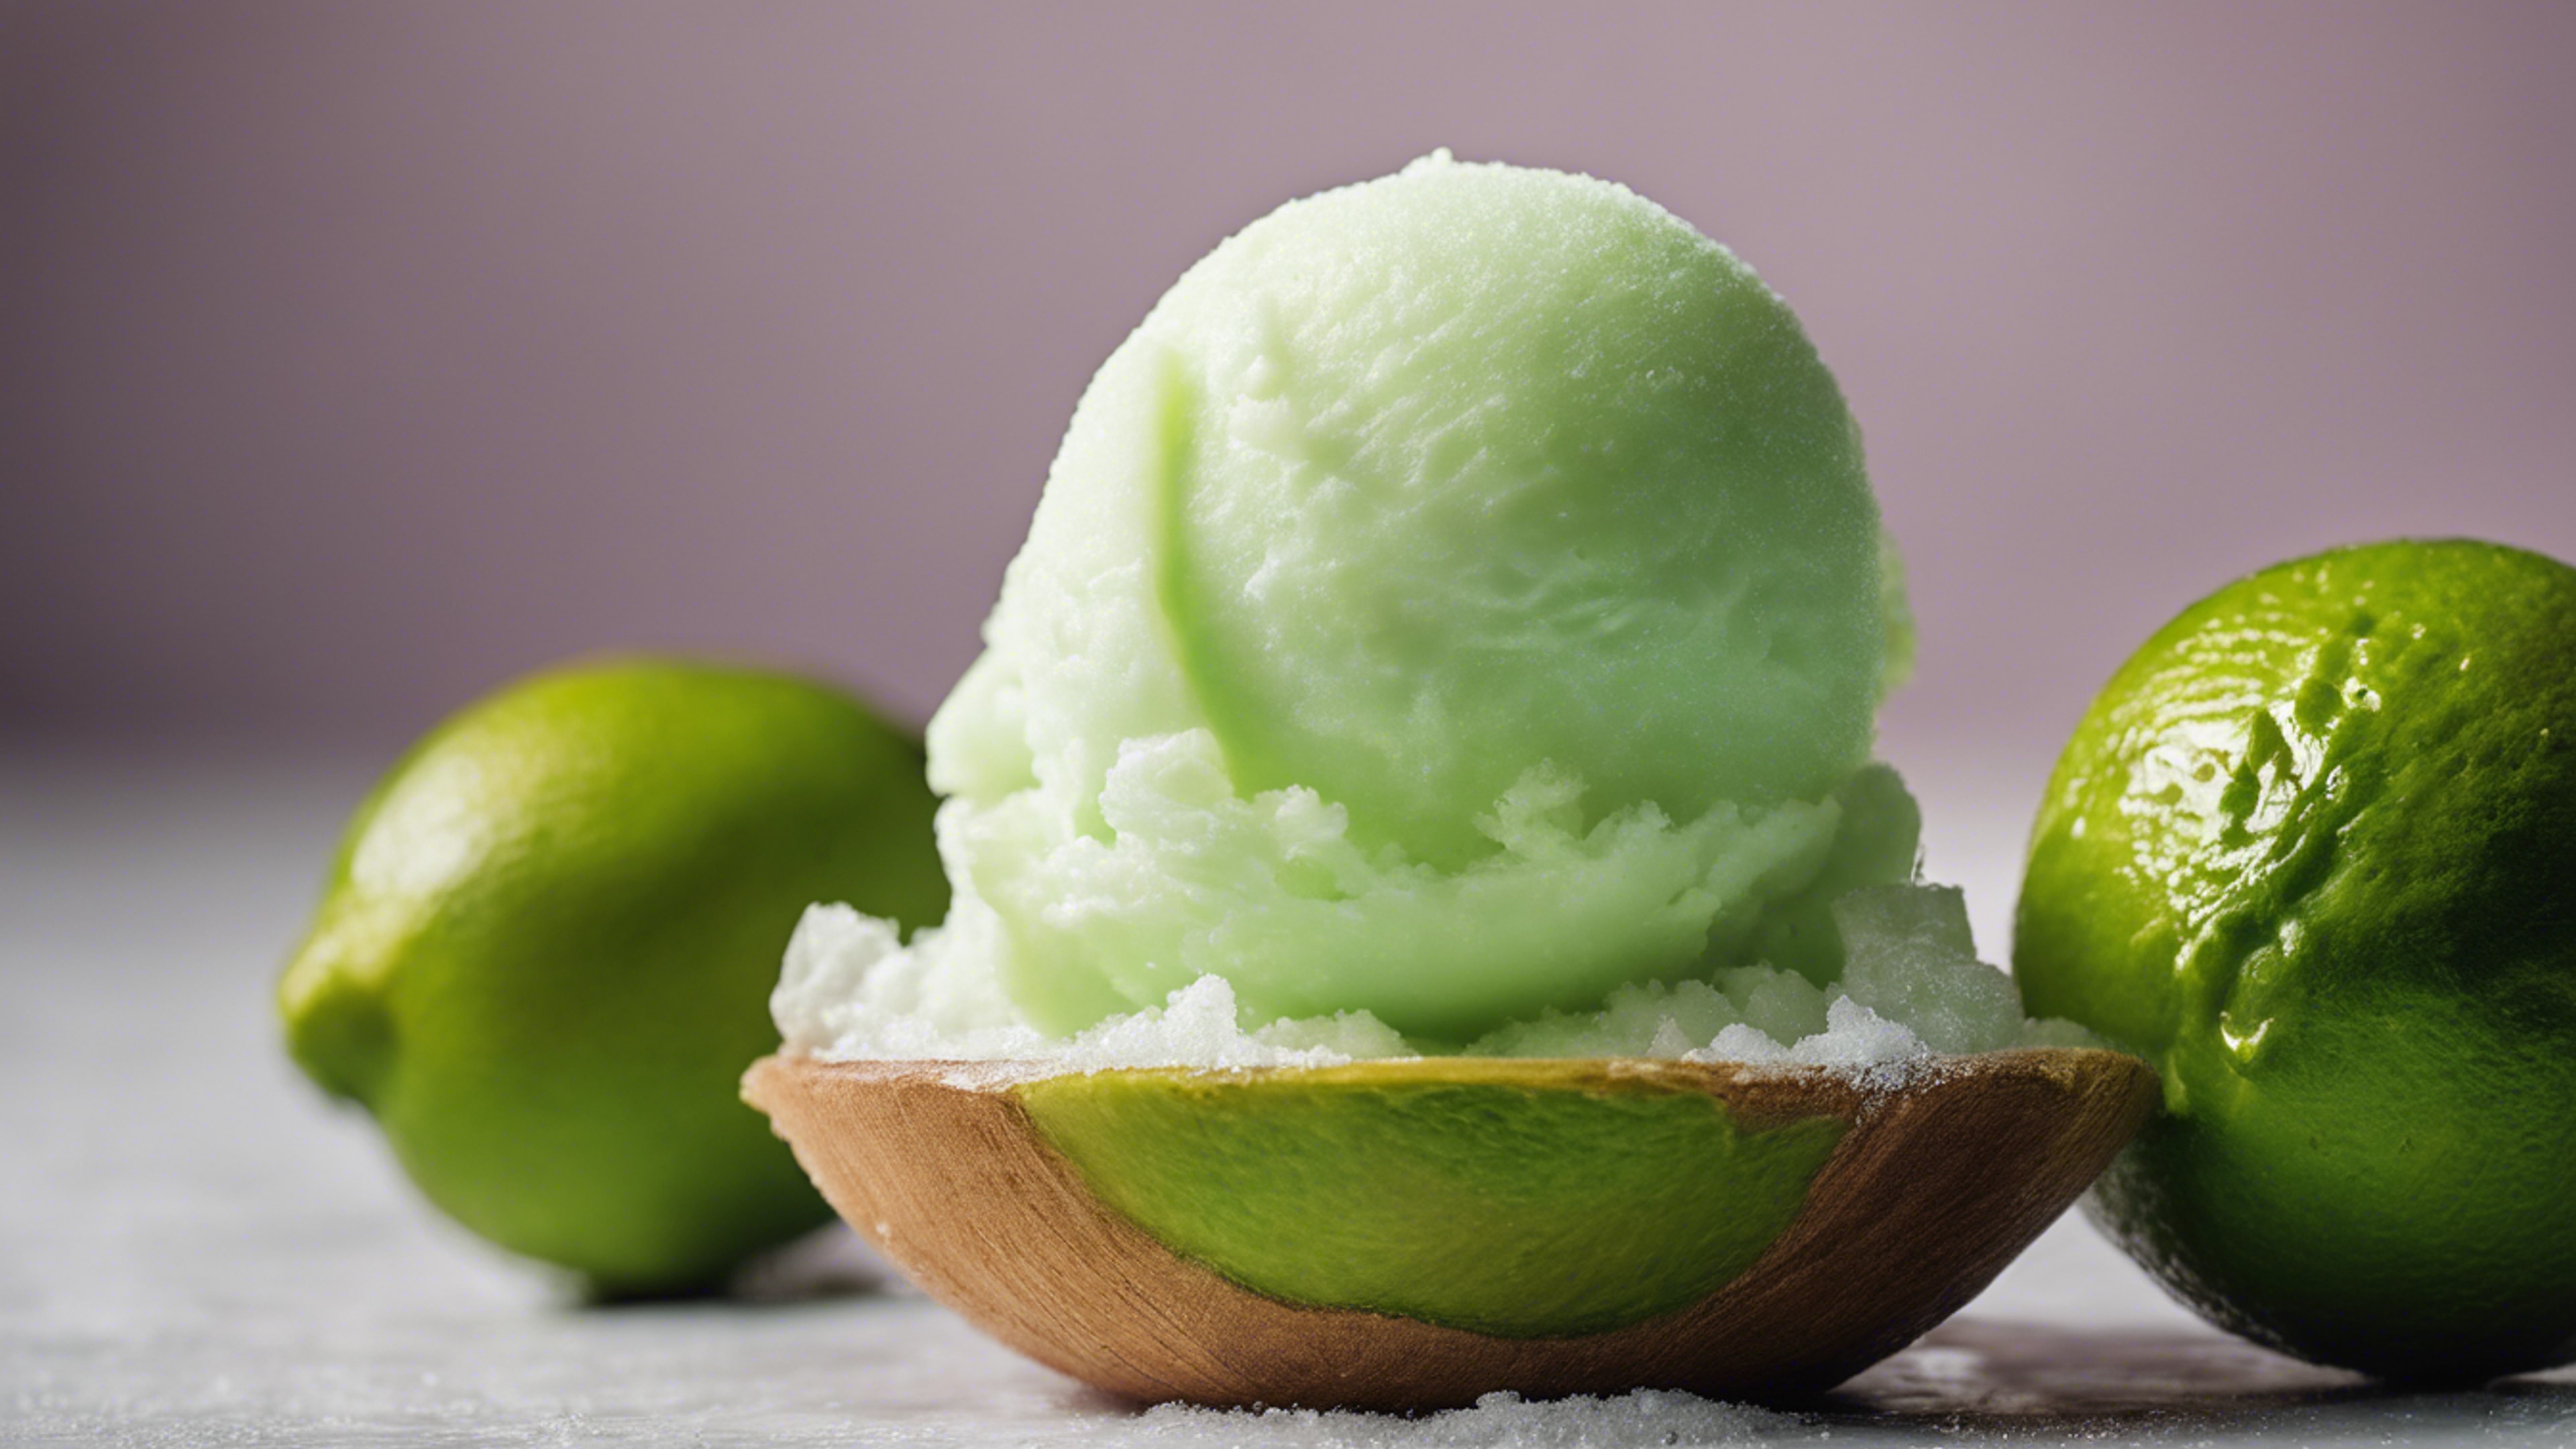 A refreshing lime sorbet in half a lime. Tapéta[a668216f0615484a943a]